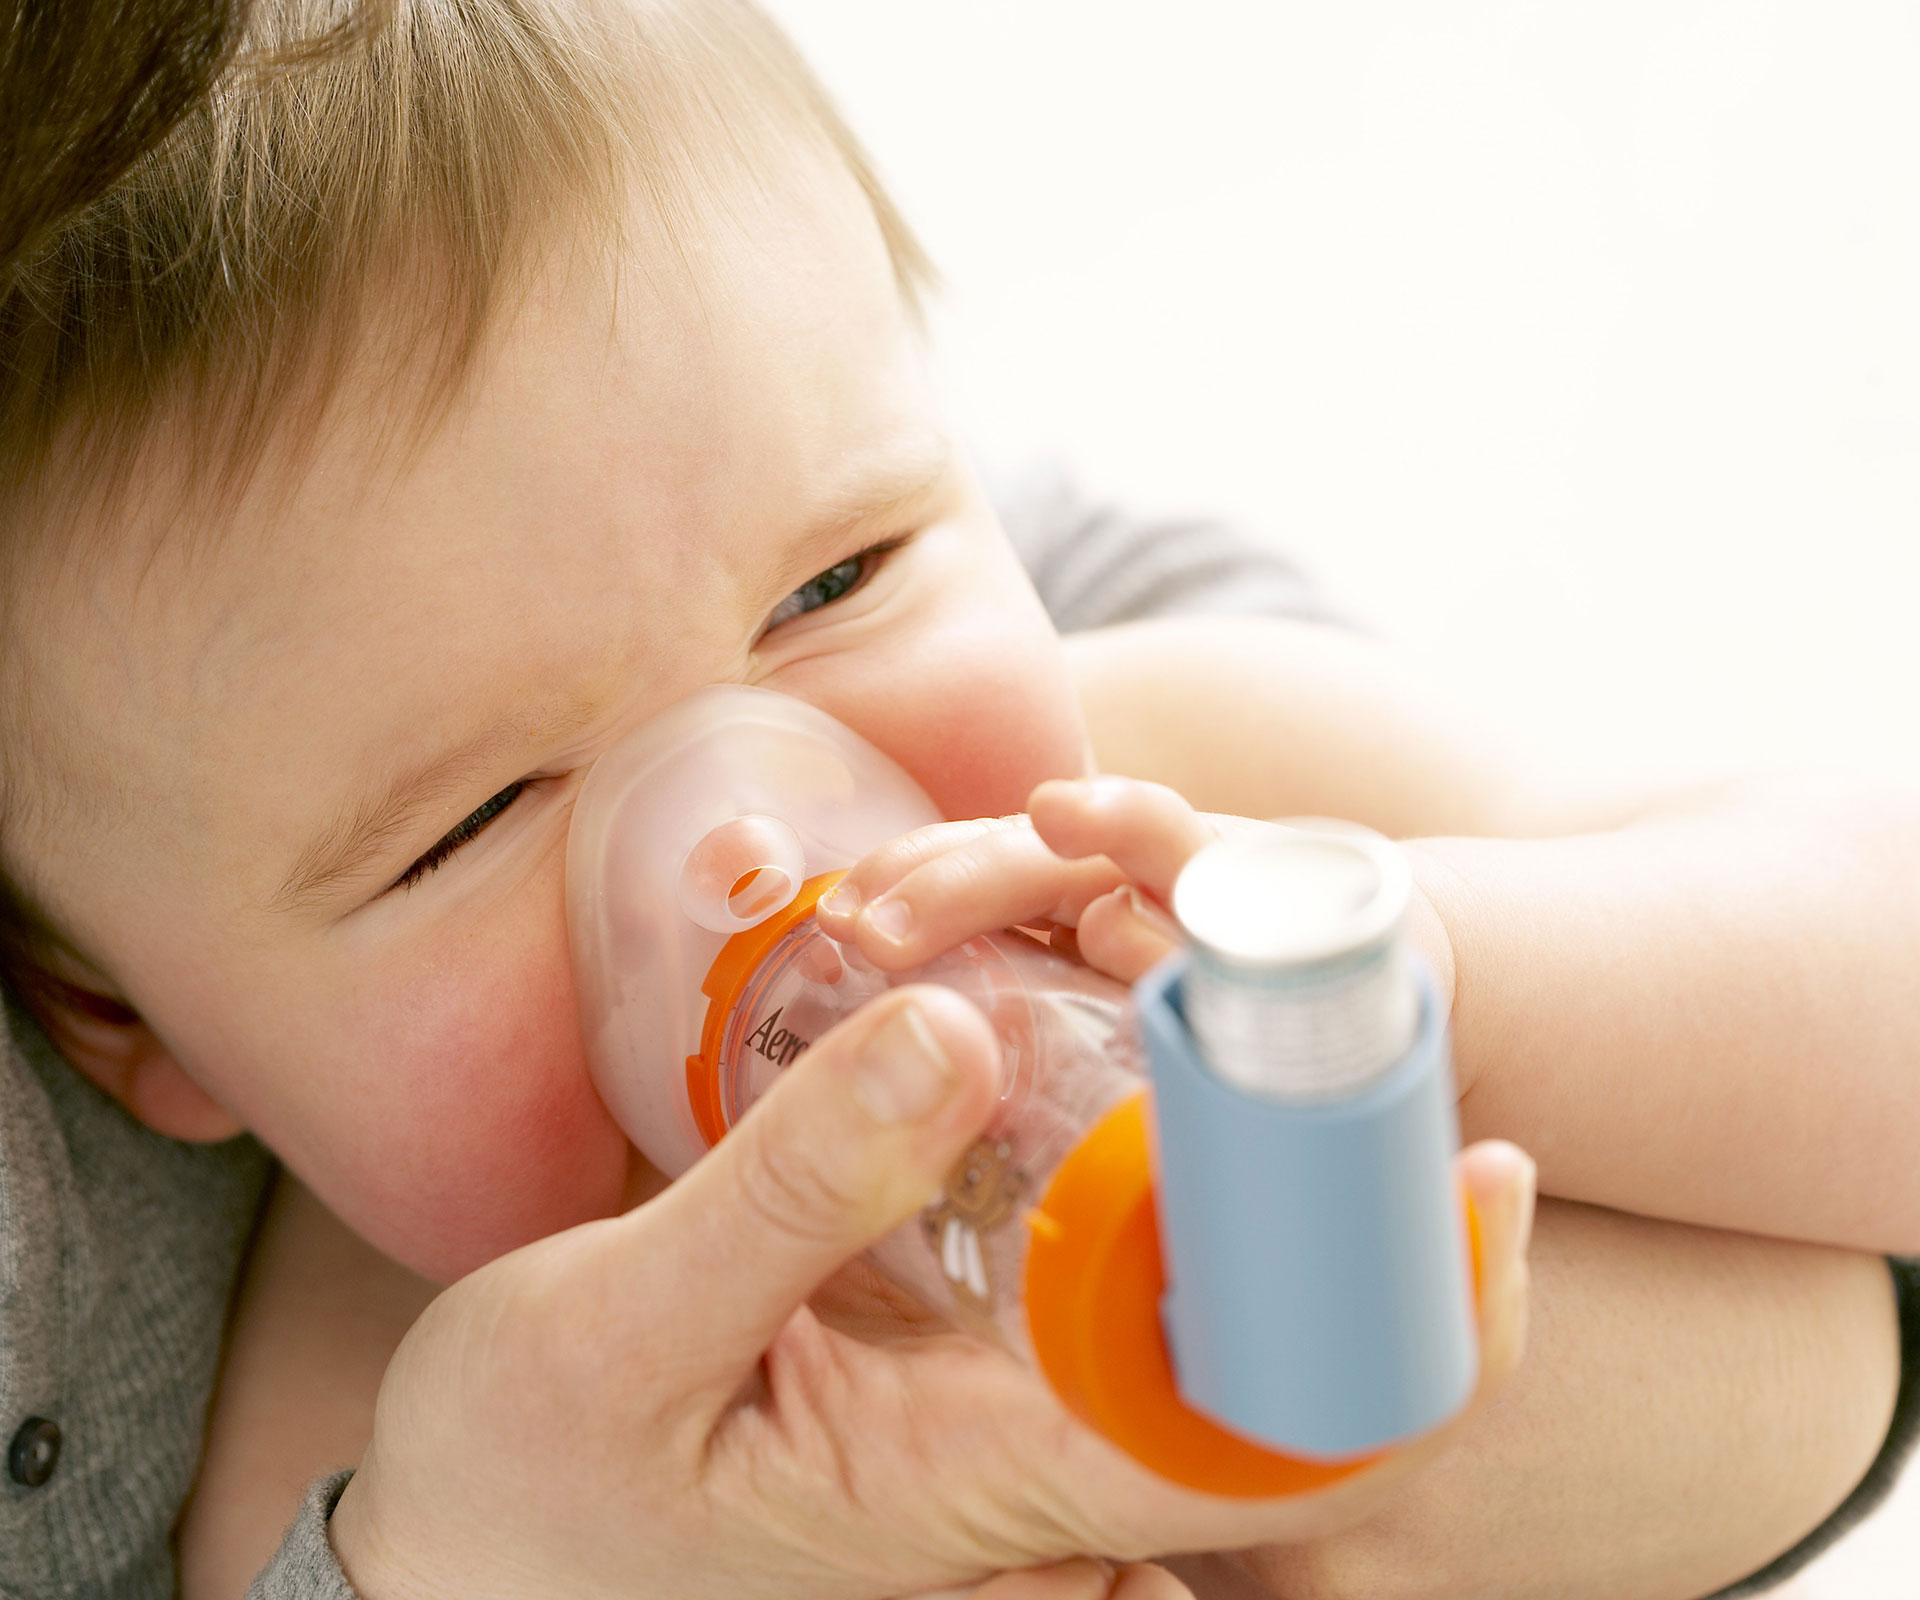 The truth about why doctors aren’t diagnosing asthma in babies and toddlers